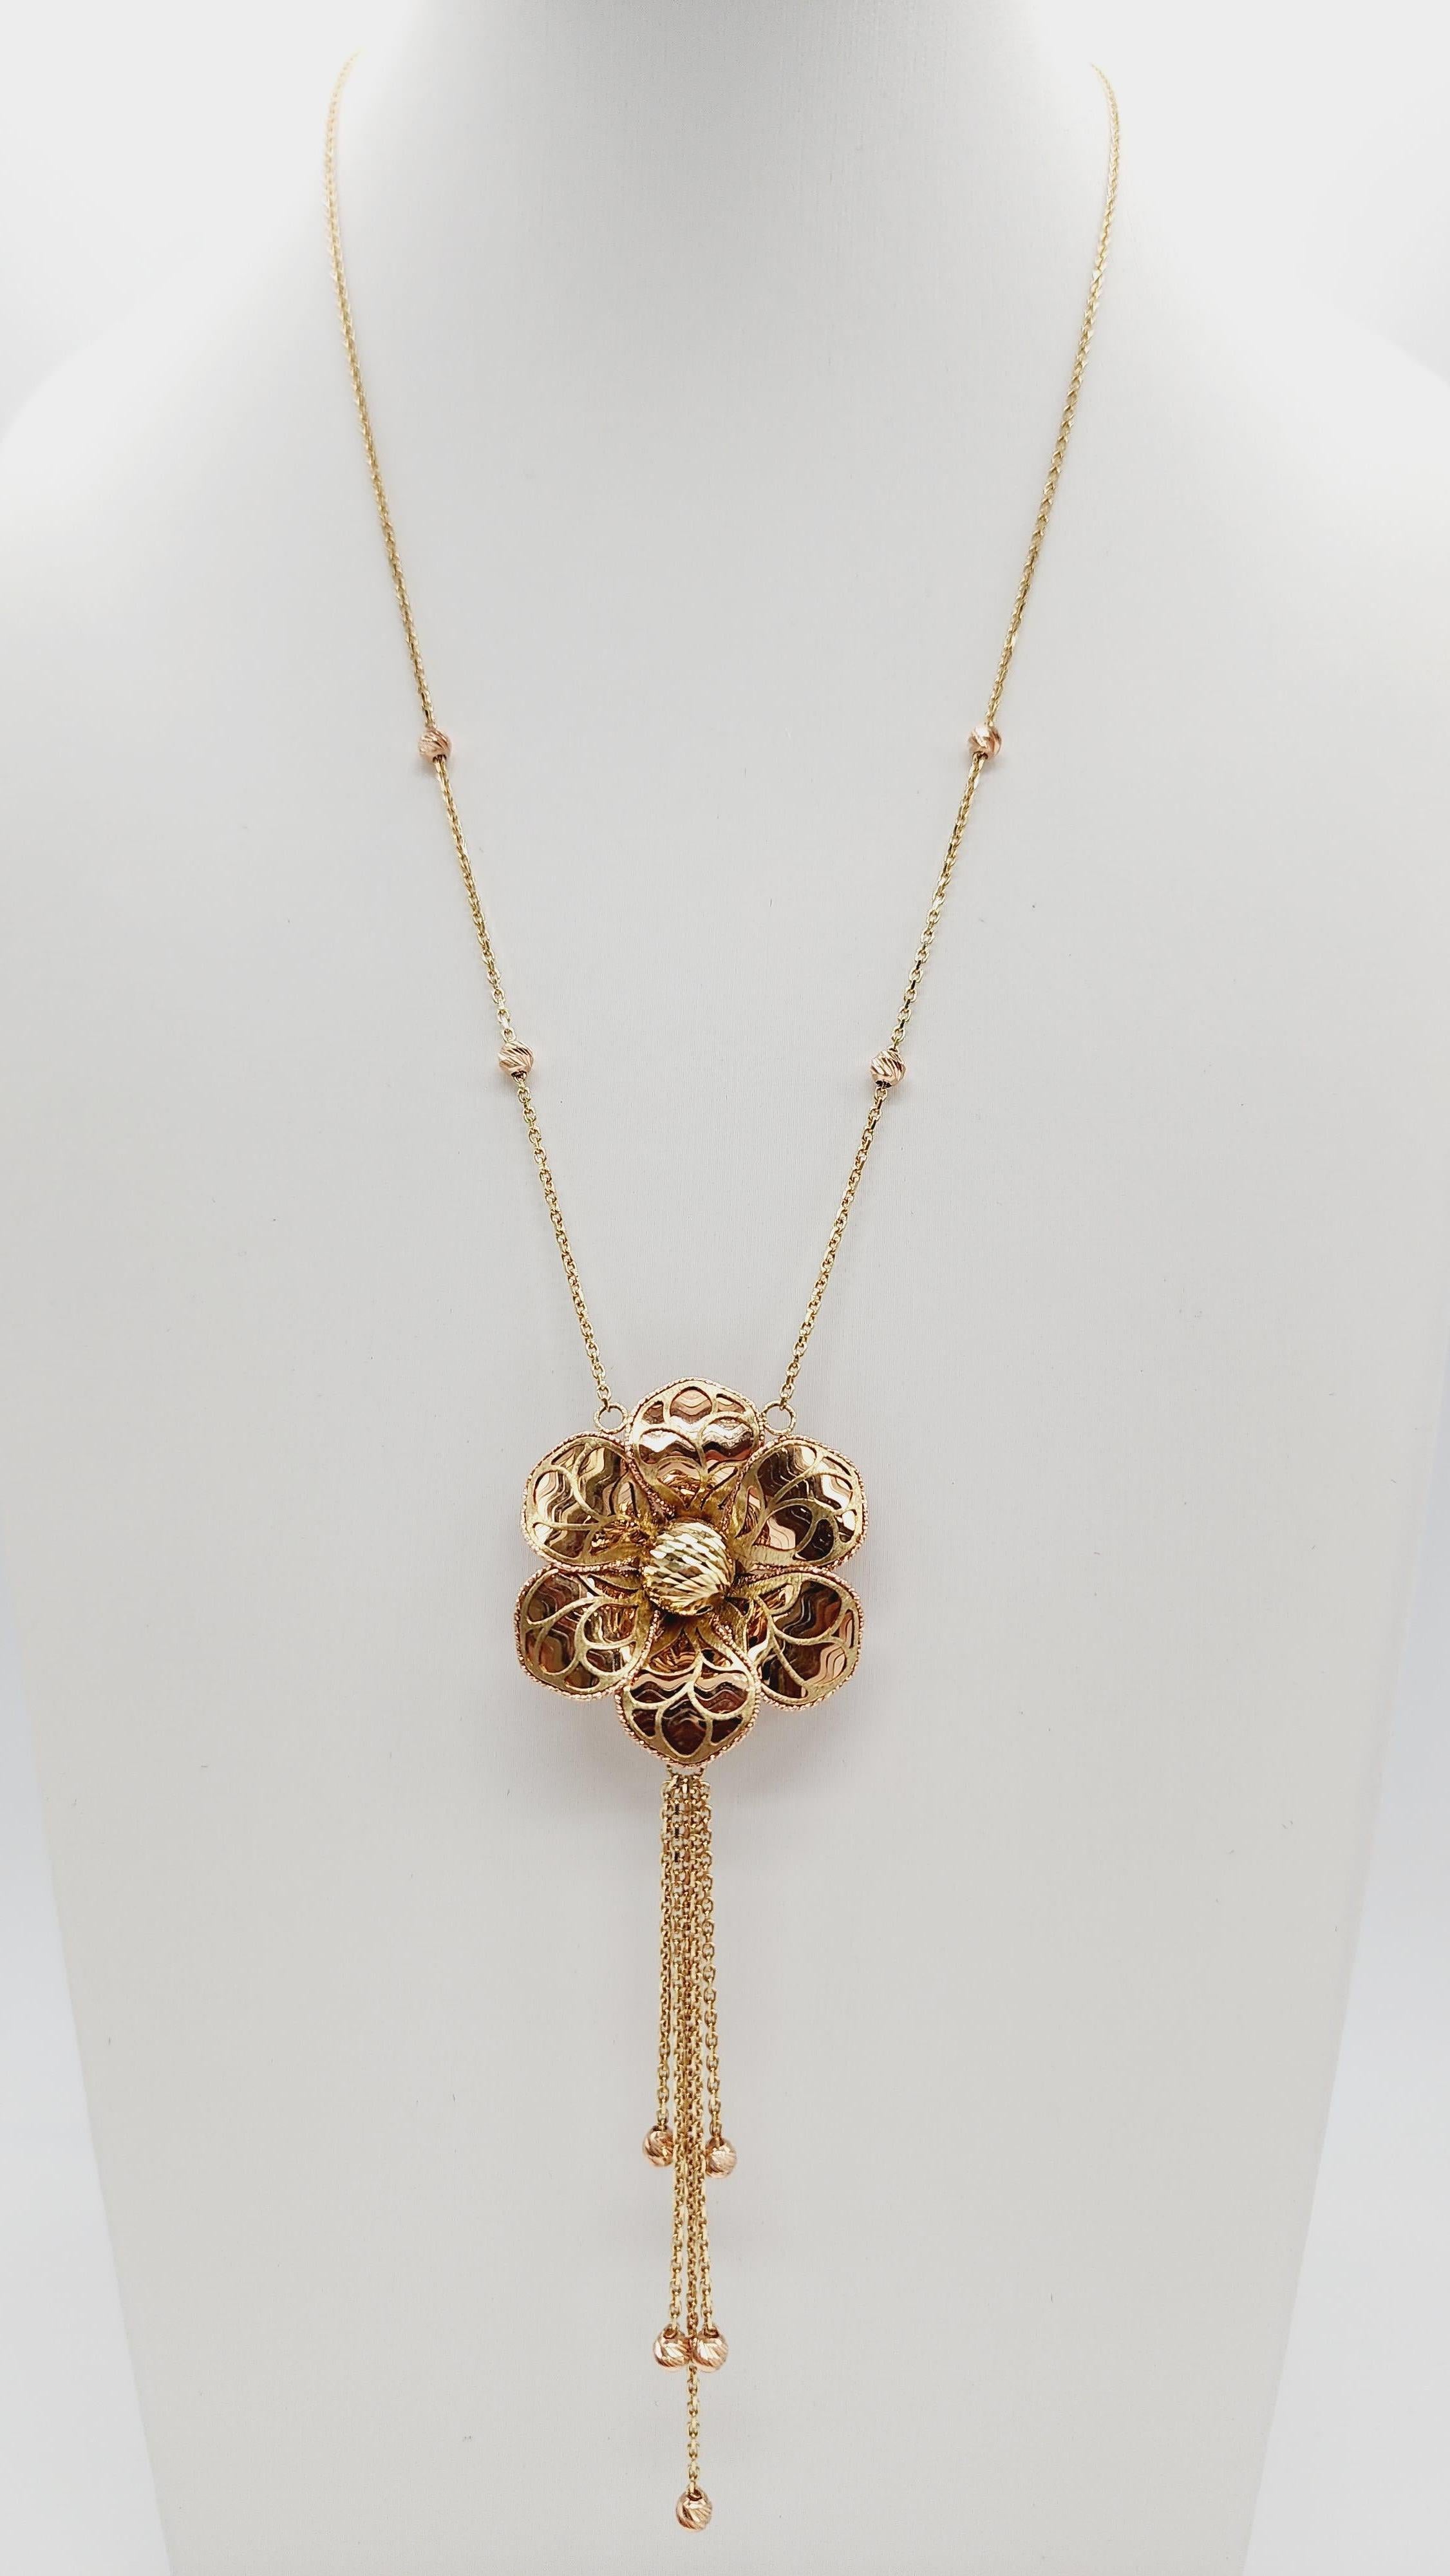 Flower Shape Pendant Rose Gold 14 Karat 16 inch

Pendant Measurements: 1.10 x 1.00 inch

*Free shipping within the U.S.*